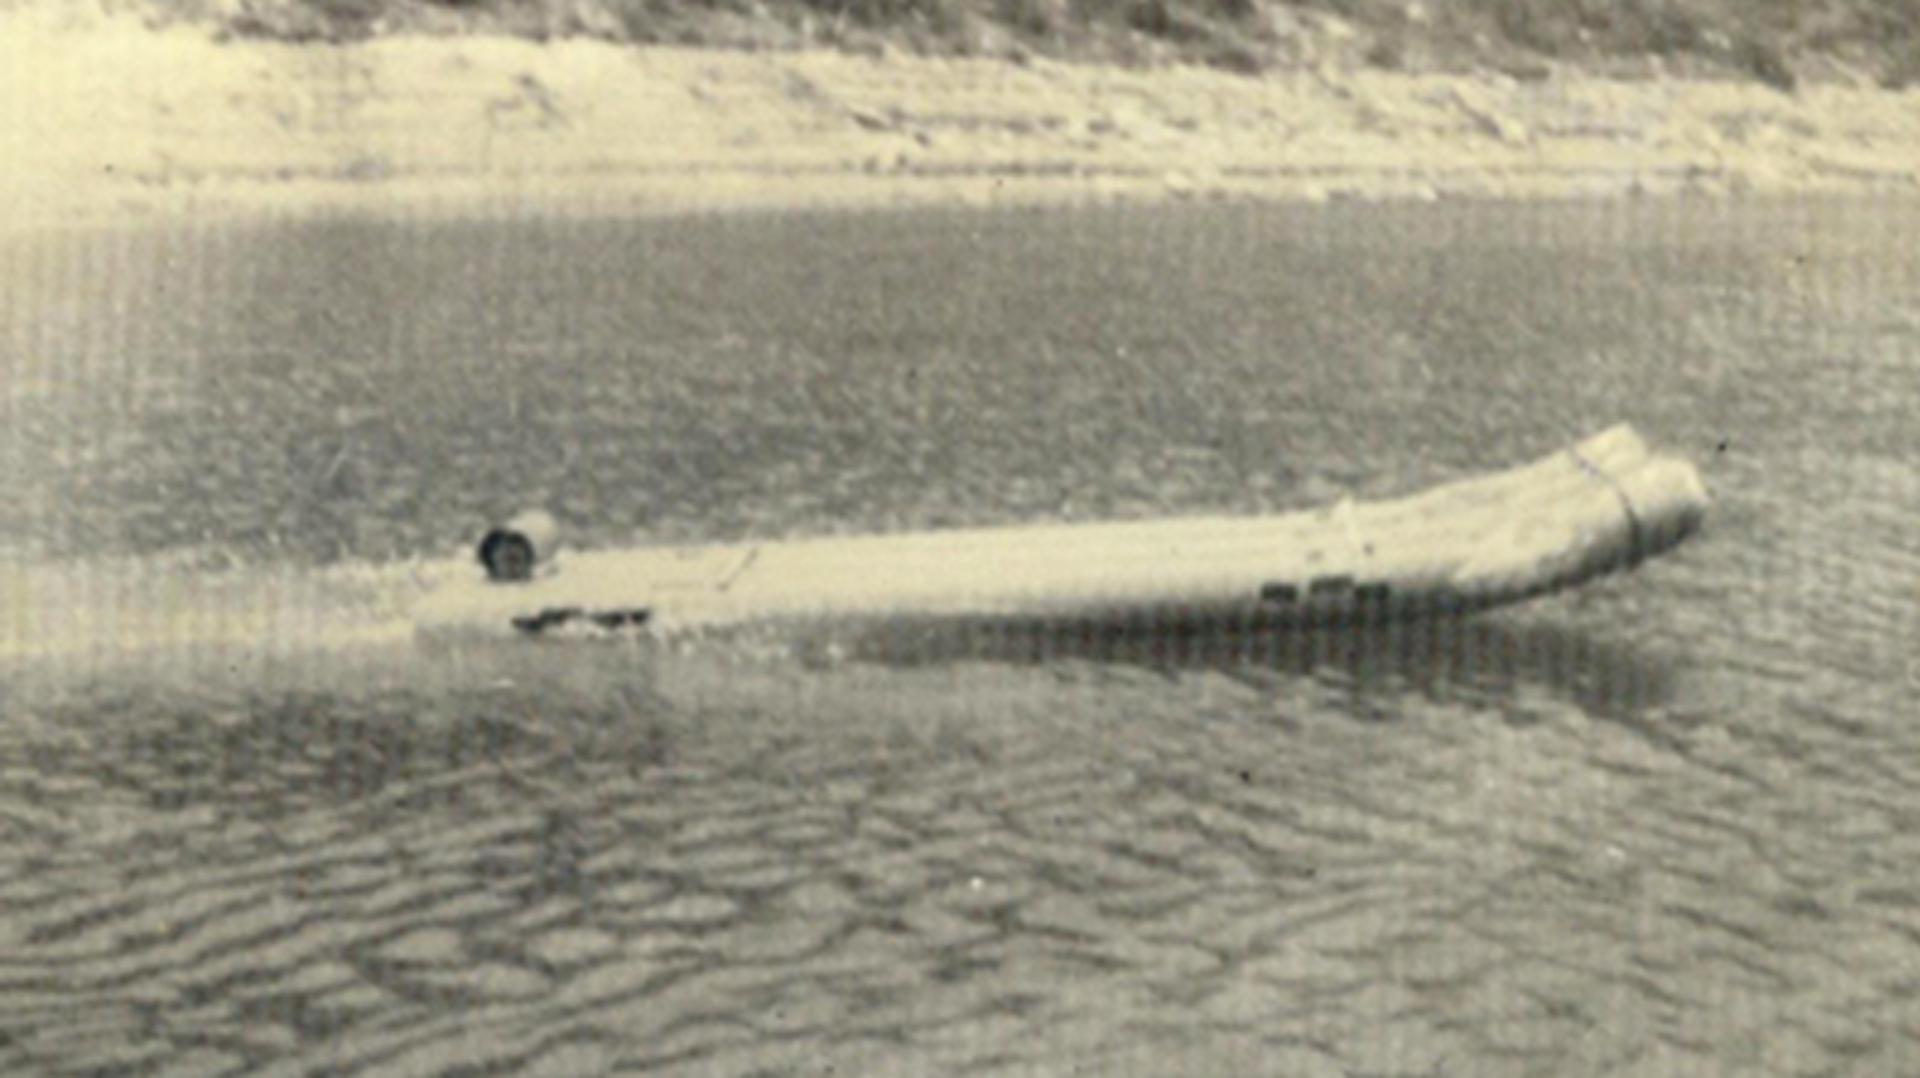 A scale model of the Tube Boat being tested in a reservoir near the Basses Alpes